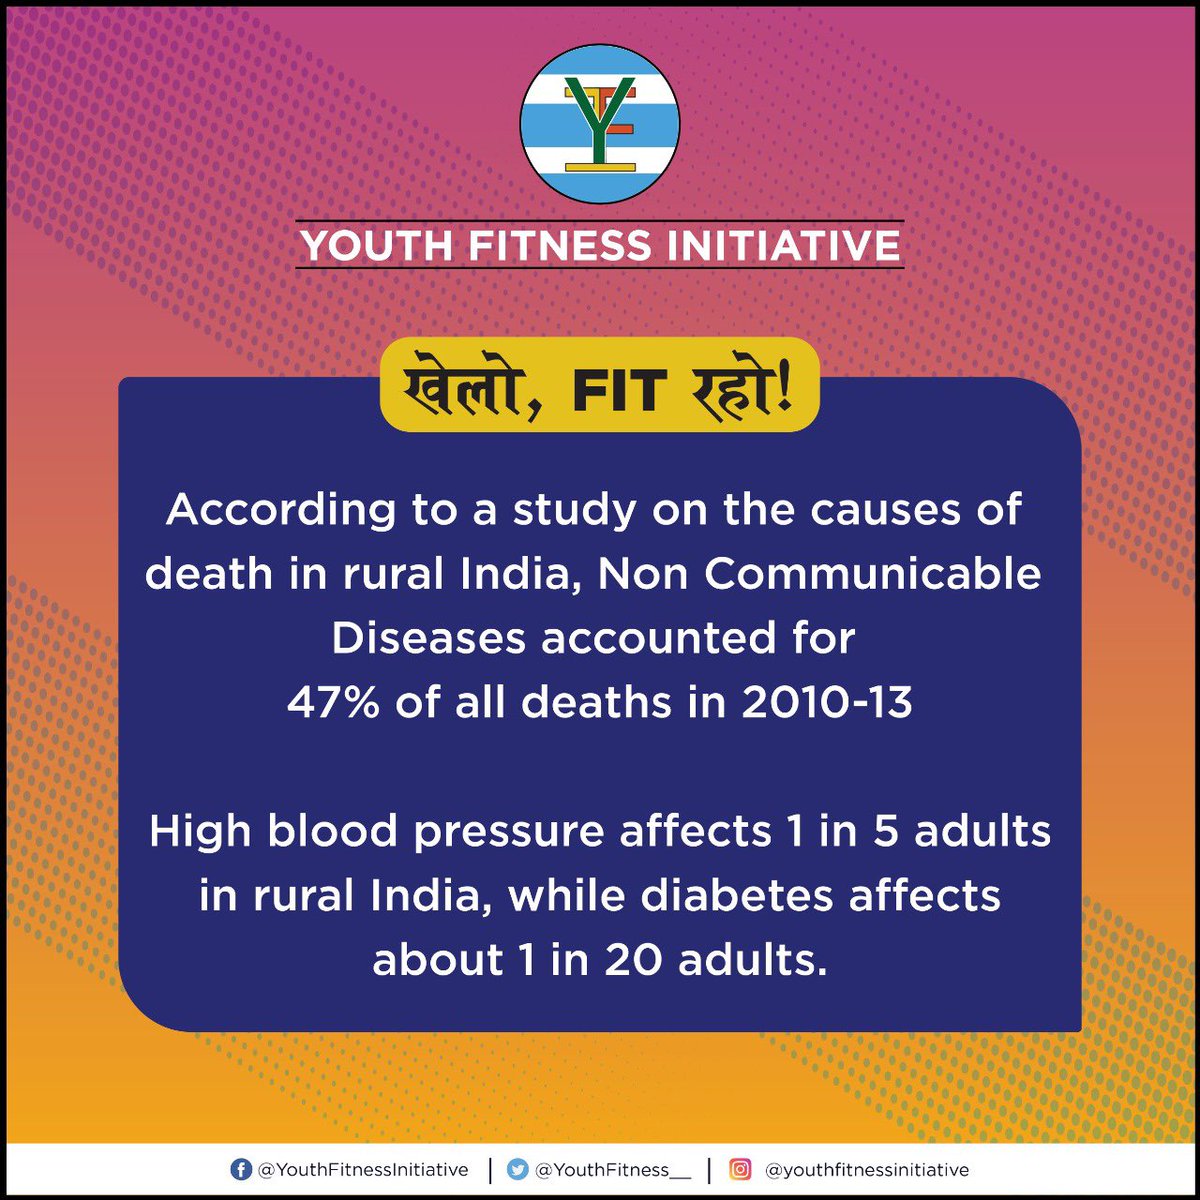 The threat of #lifestylediseases is rising in our rural communities. We need to build on our sporting & fitness culture to combat spread of diabetes, obesity & heart disease. #Fitness